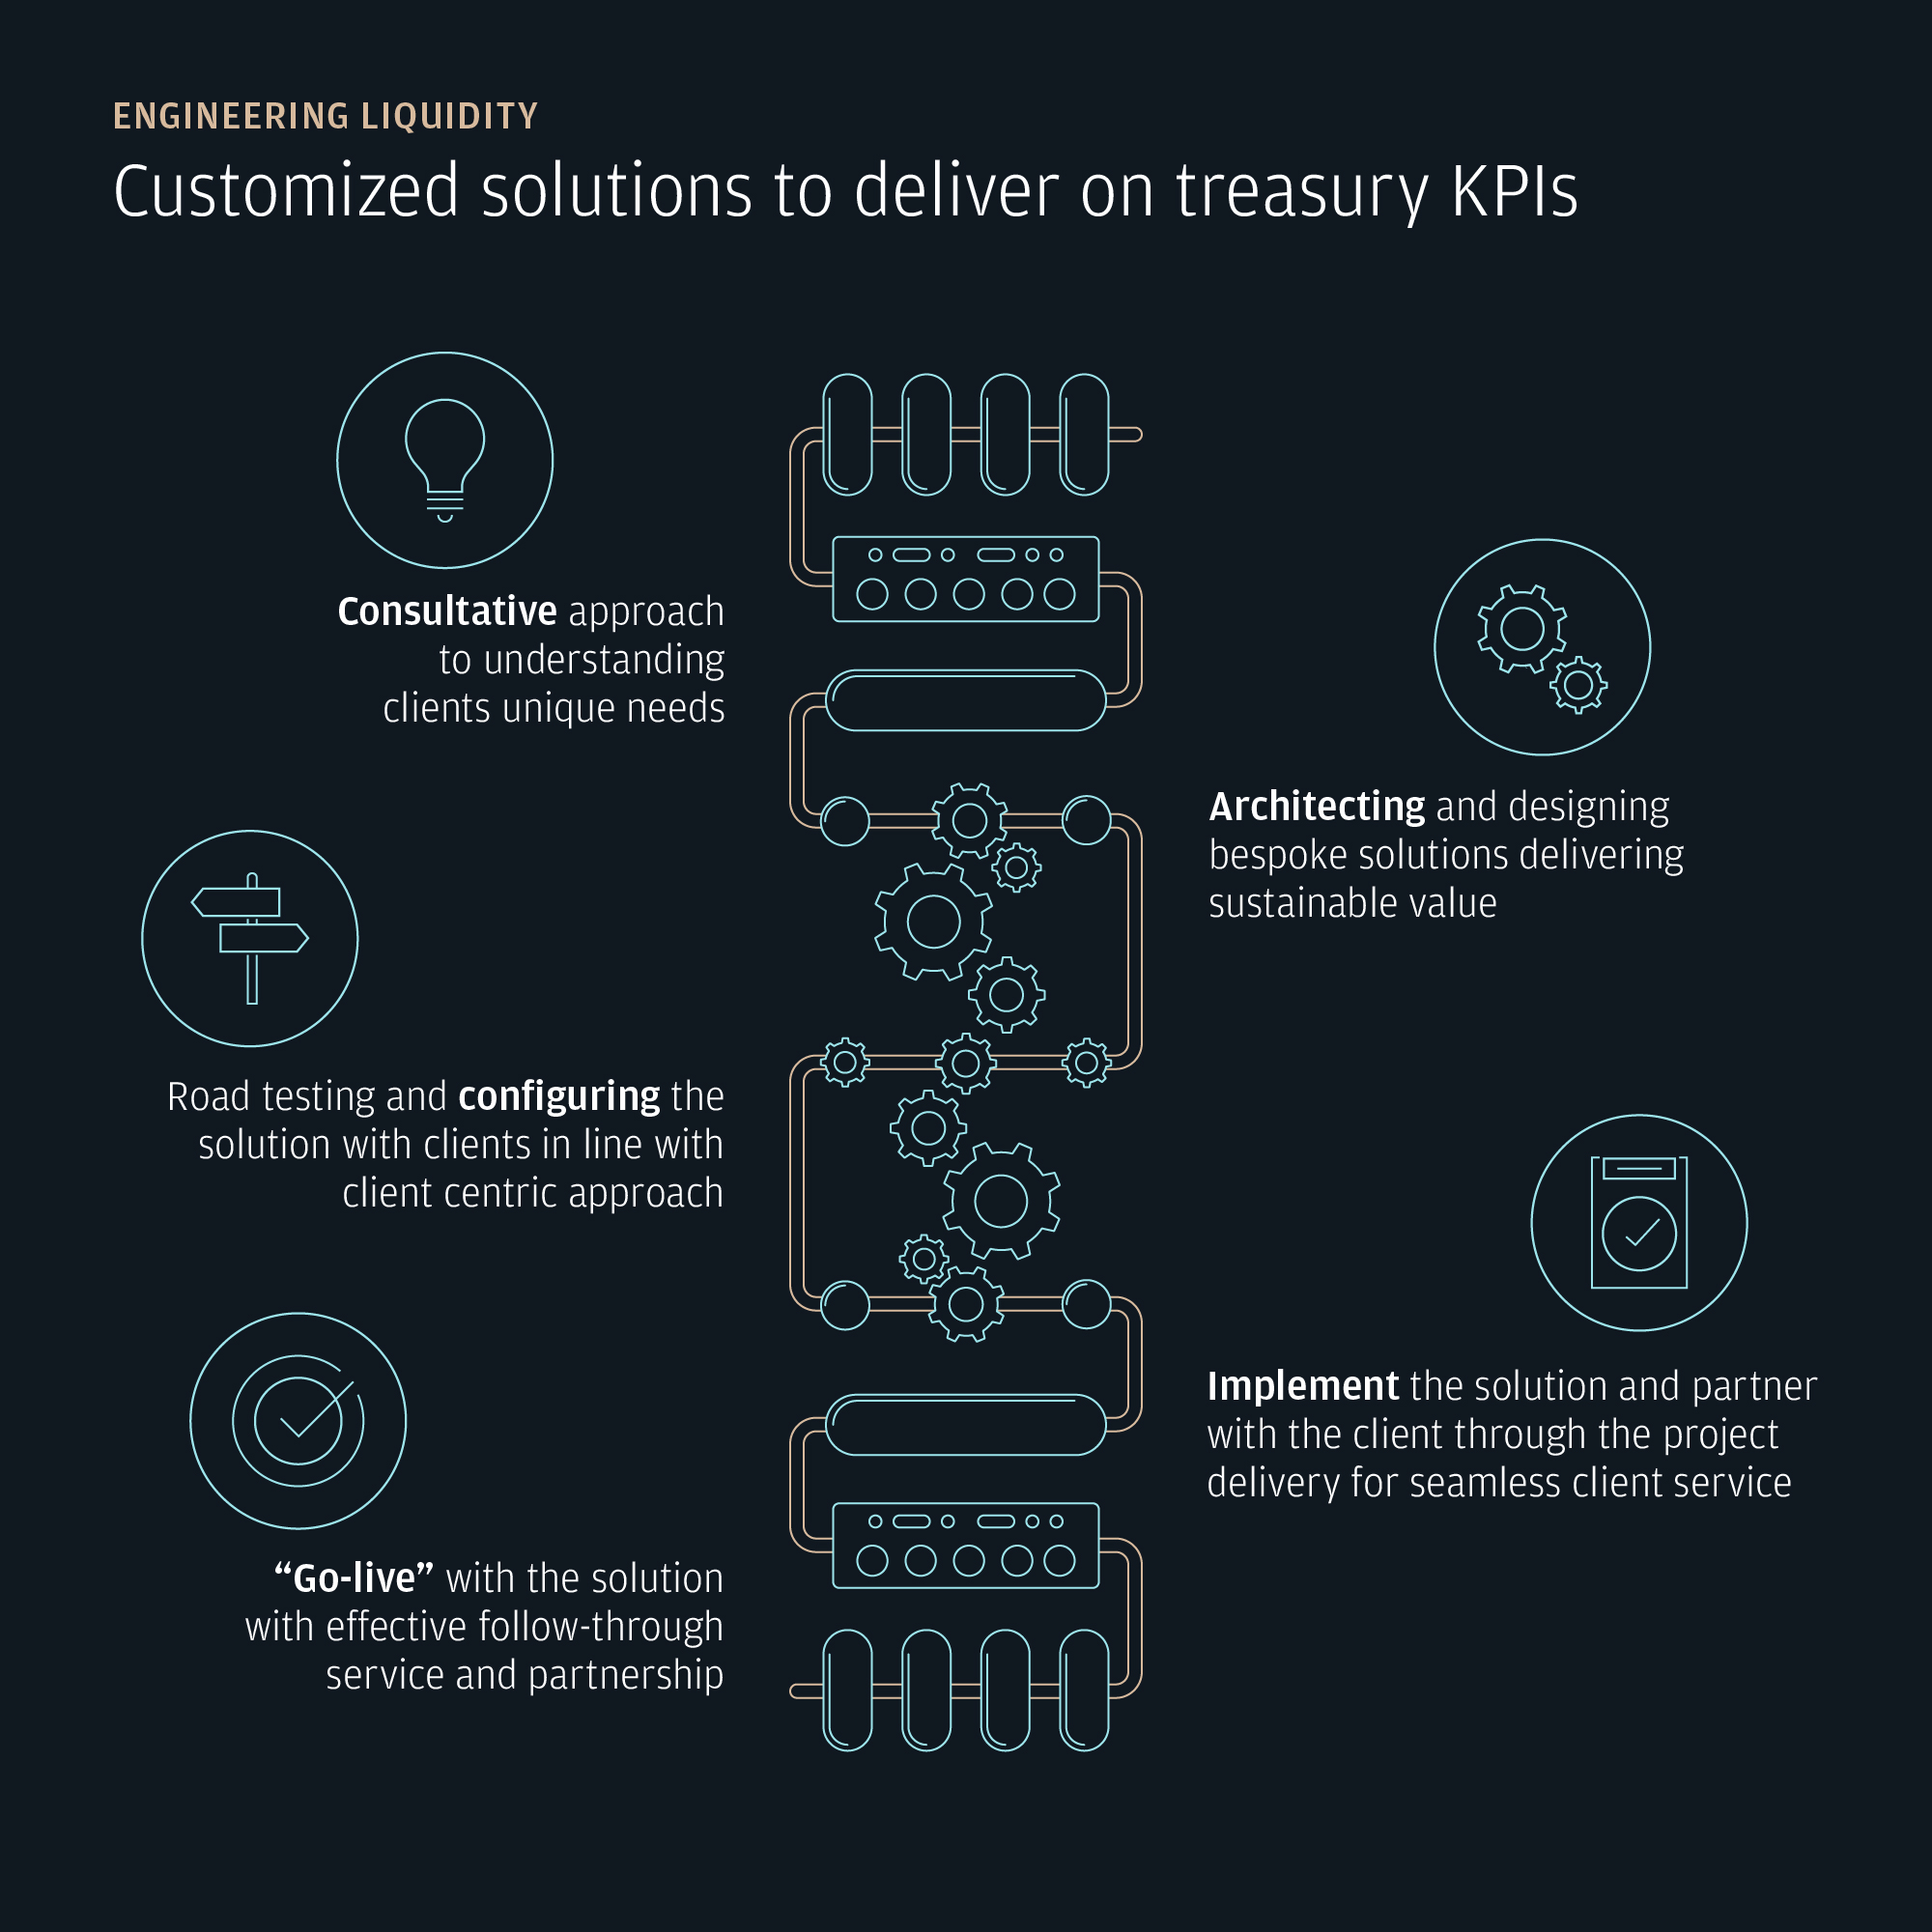 Engineering liquidity solutions to deliver on treasury KPIs